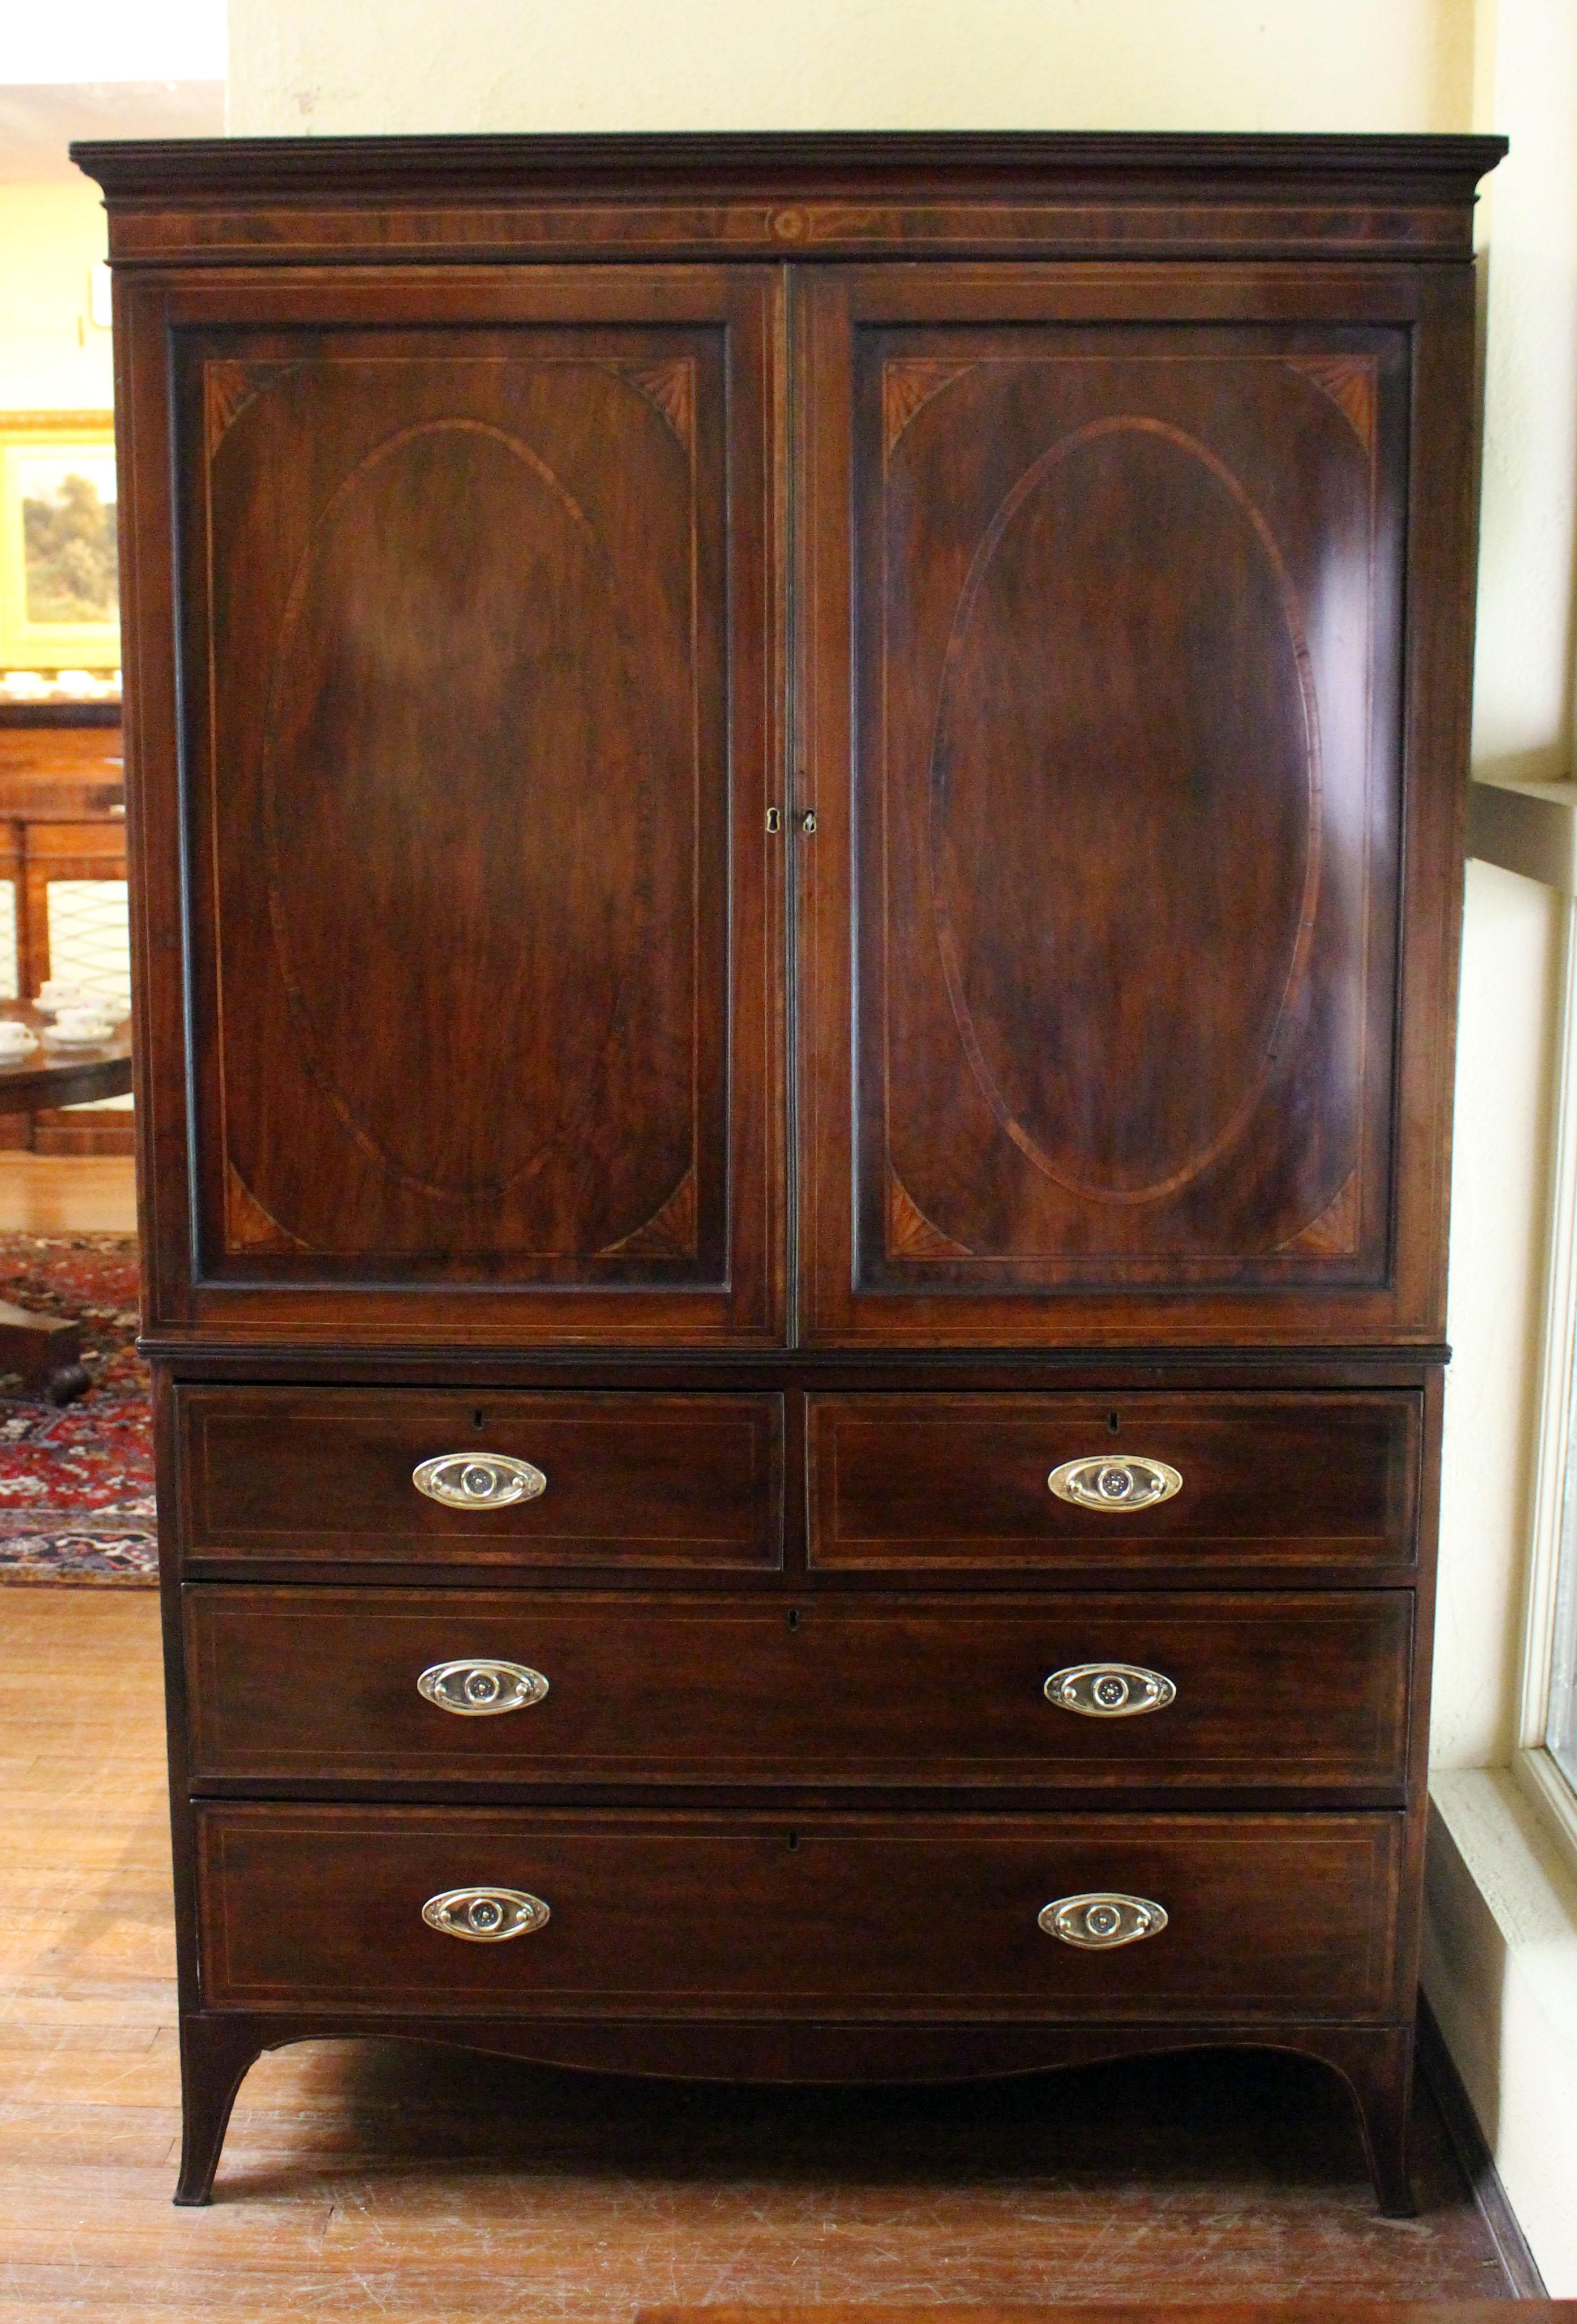 Circa 1800 Georgian period inlaid linen press, English. Mahogany with extensive inlays including large ovals with rectangular borders and spandrel corners on the doors. Mahogany with oak secondary wood. Reeded top crown molding with central rosette